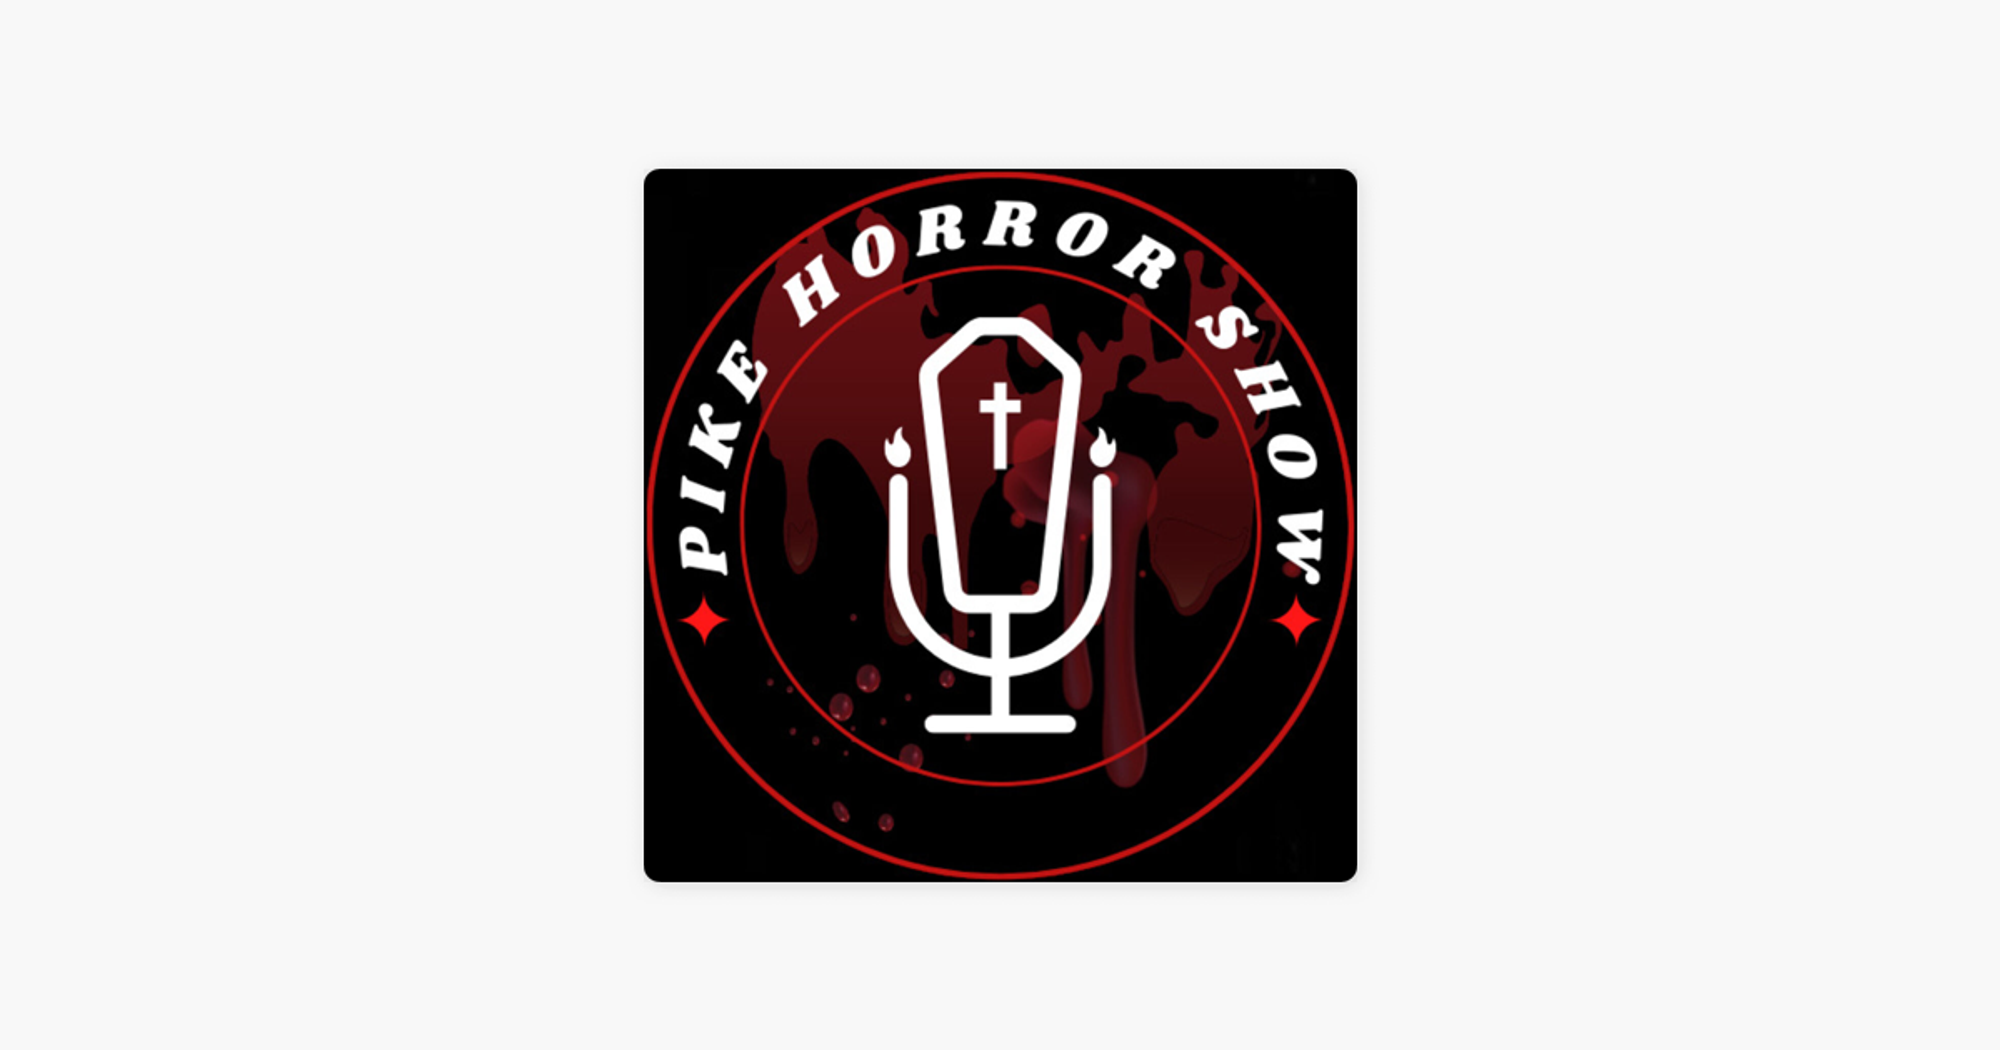 ‎The Pike Horror Show: Episode 19 - With Special Guest Stefan Heinrich Simond (of Studying Pixels) on Apple Podcasts